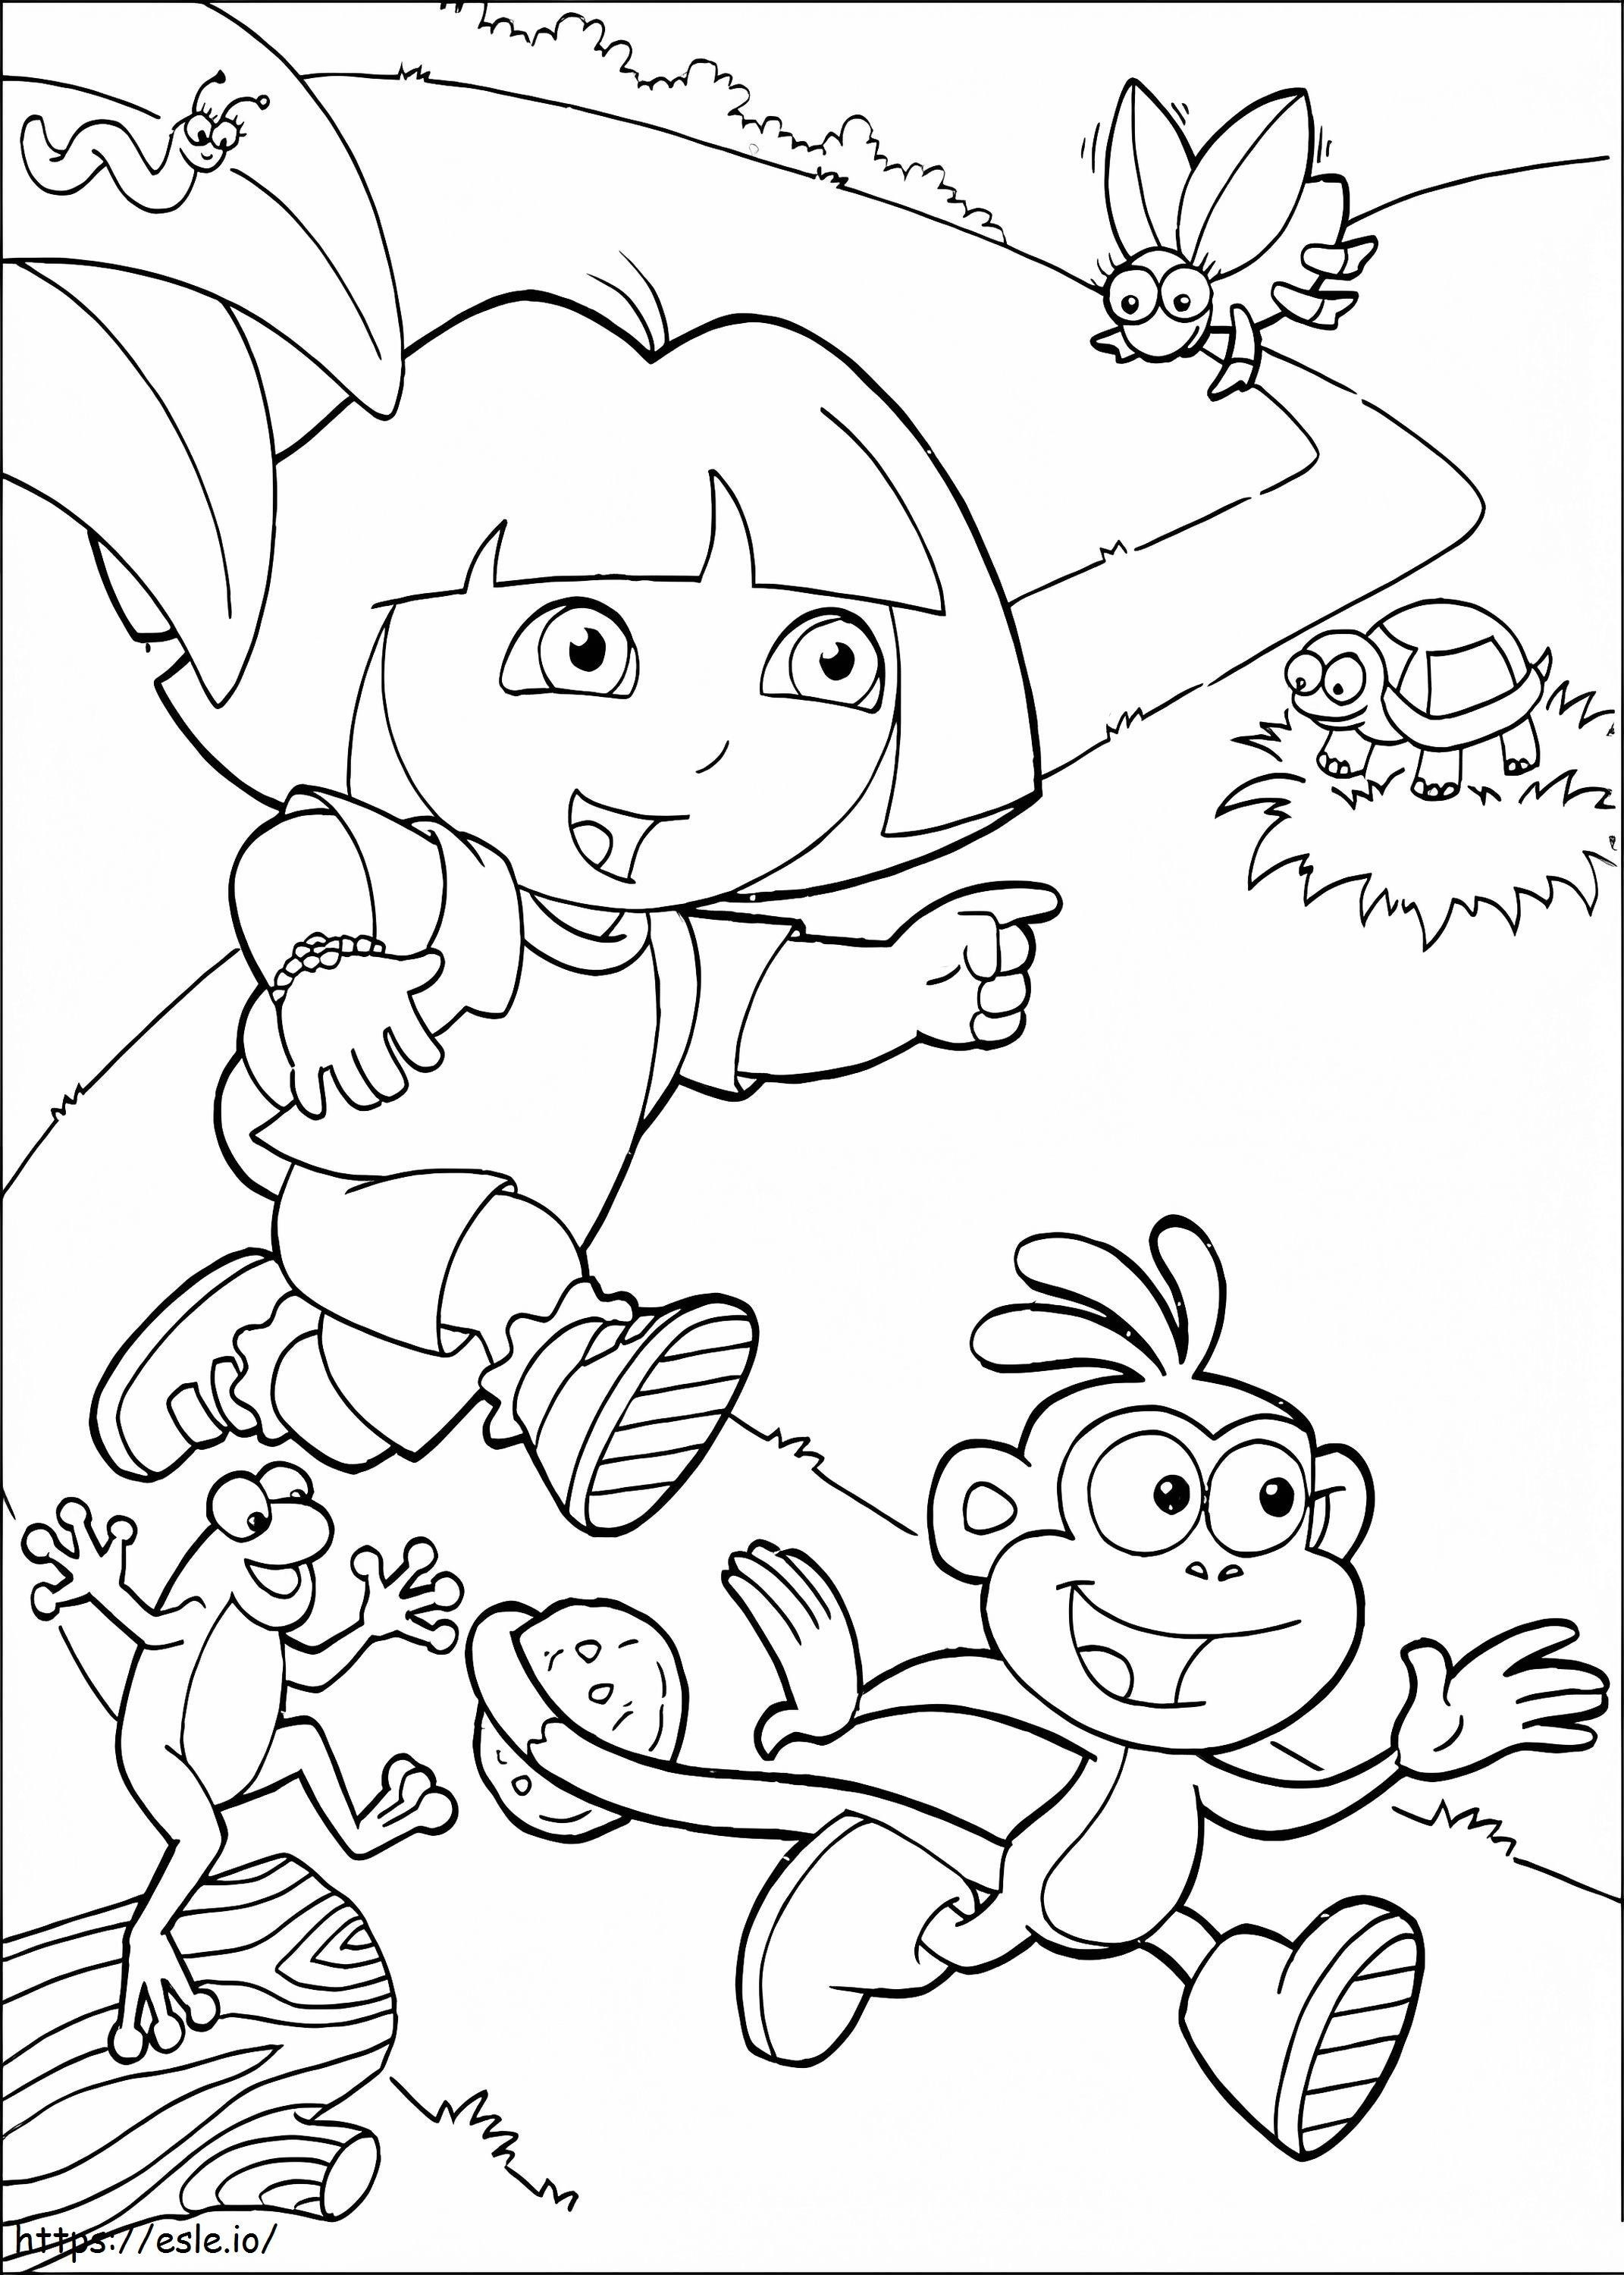 Dora And Boots Running coloring page